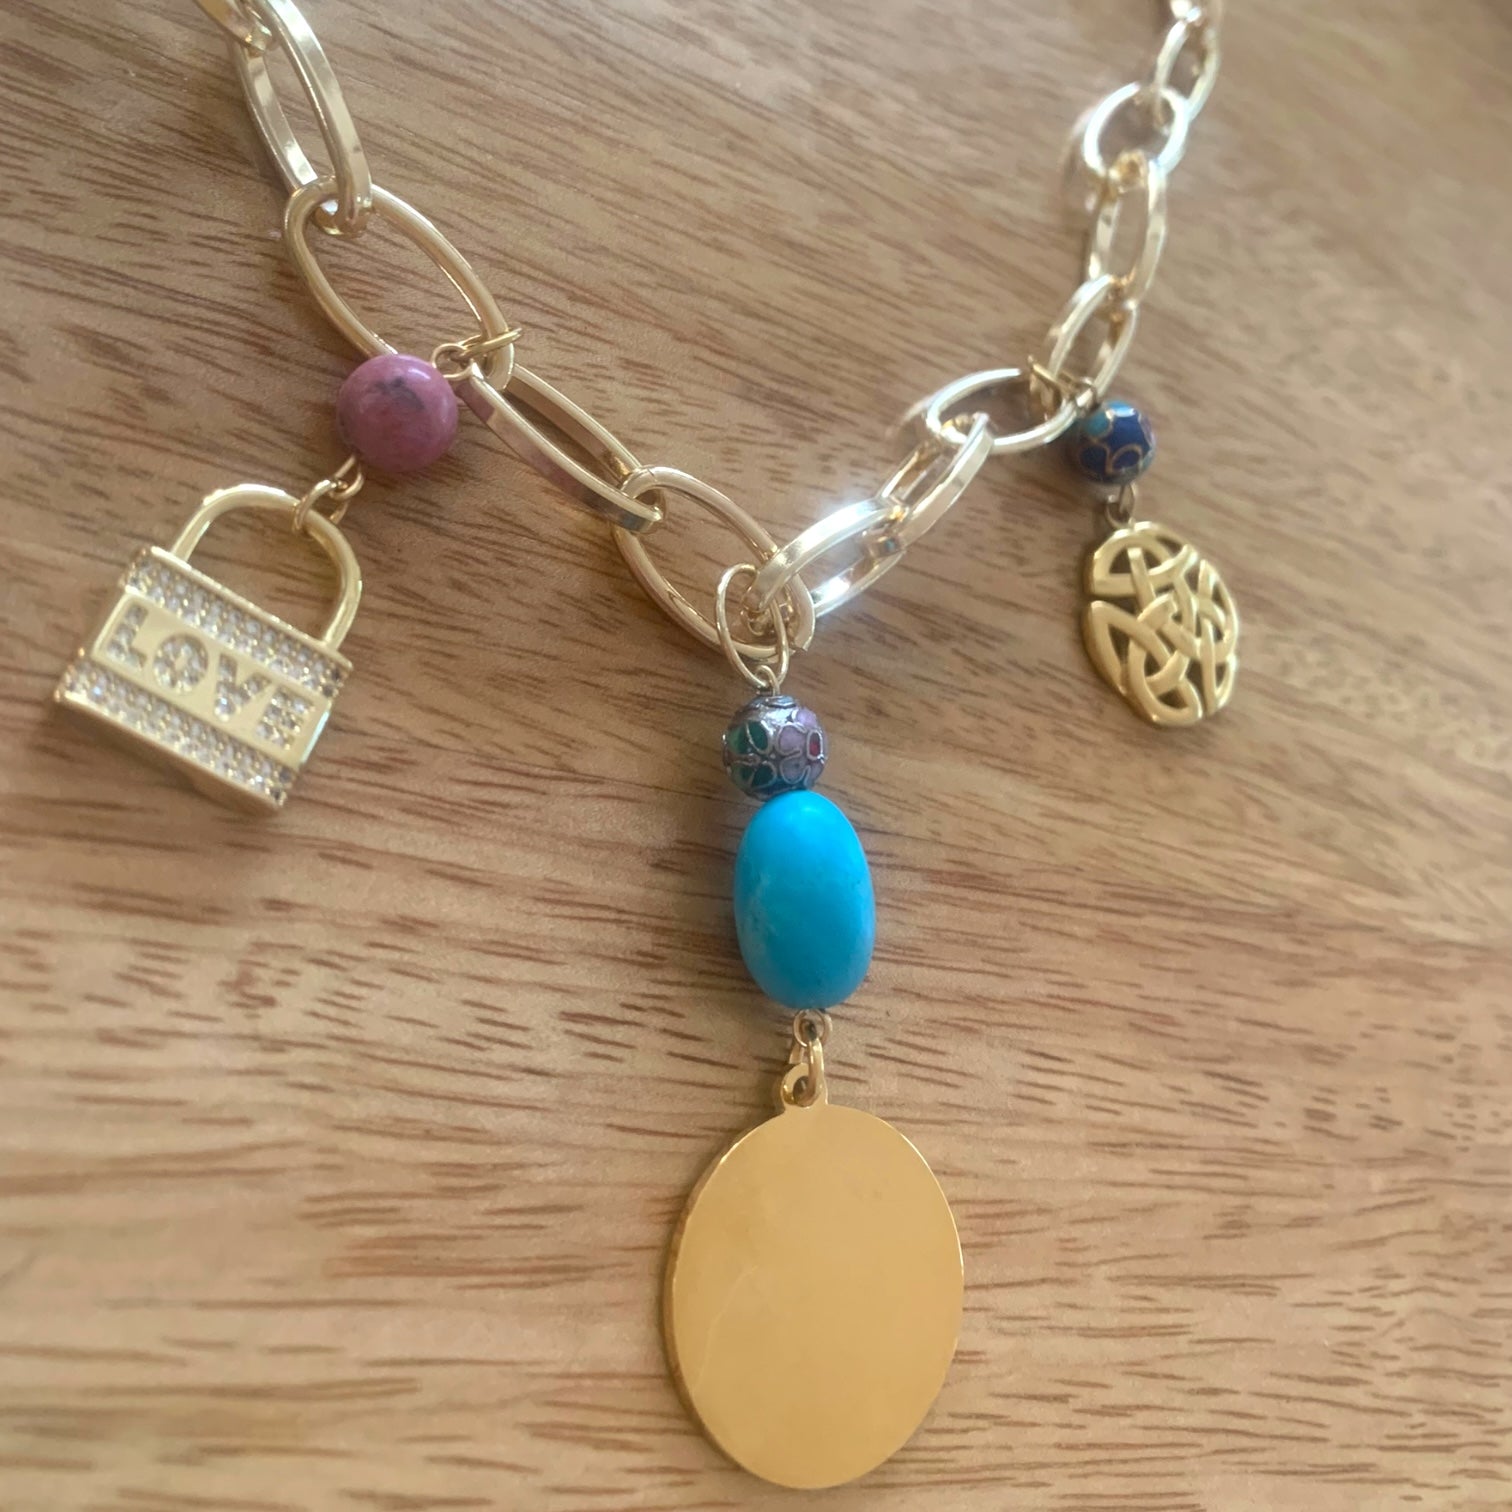 1 of 1 Turquoise and Gold Love Charm Statement Necklace-Necklace